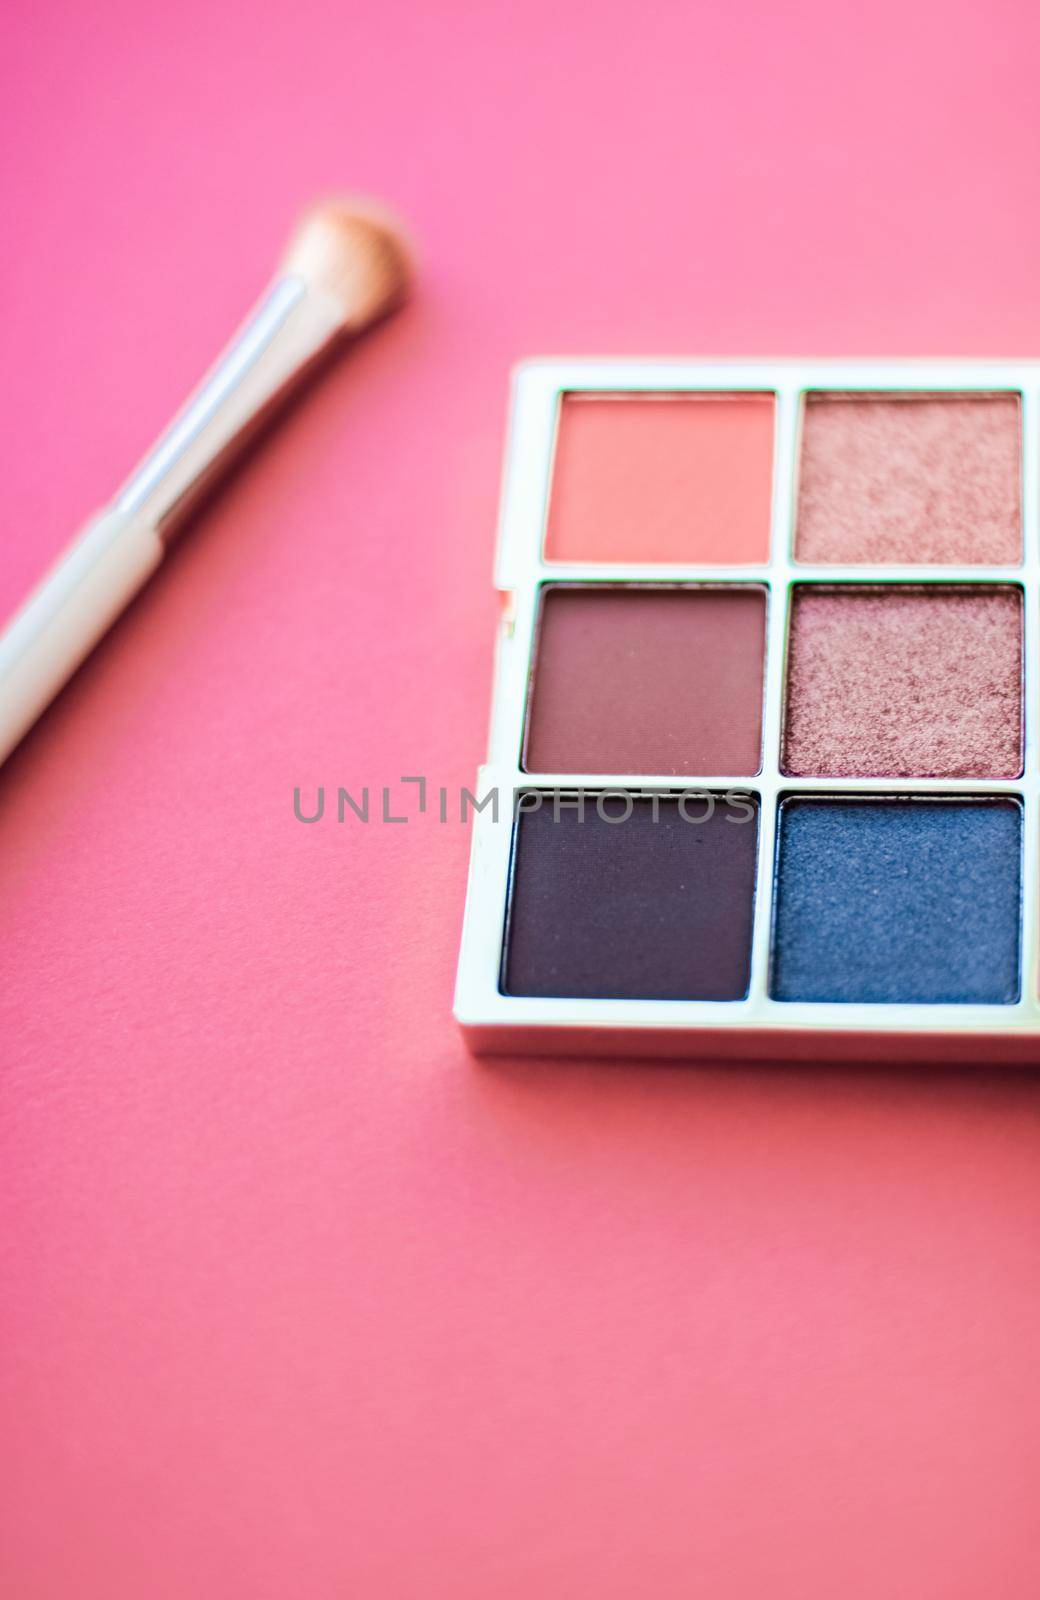 Eyeshadow palette and make-up brush on coral background, eye shadows cosmetics product for luxury beauty brand promotion and holiday fashion blog design by Anneleven